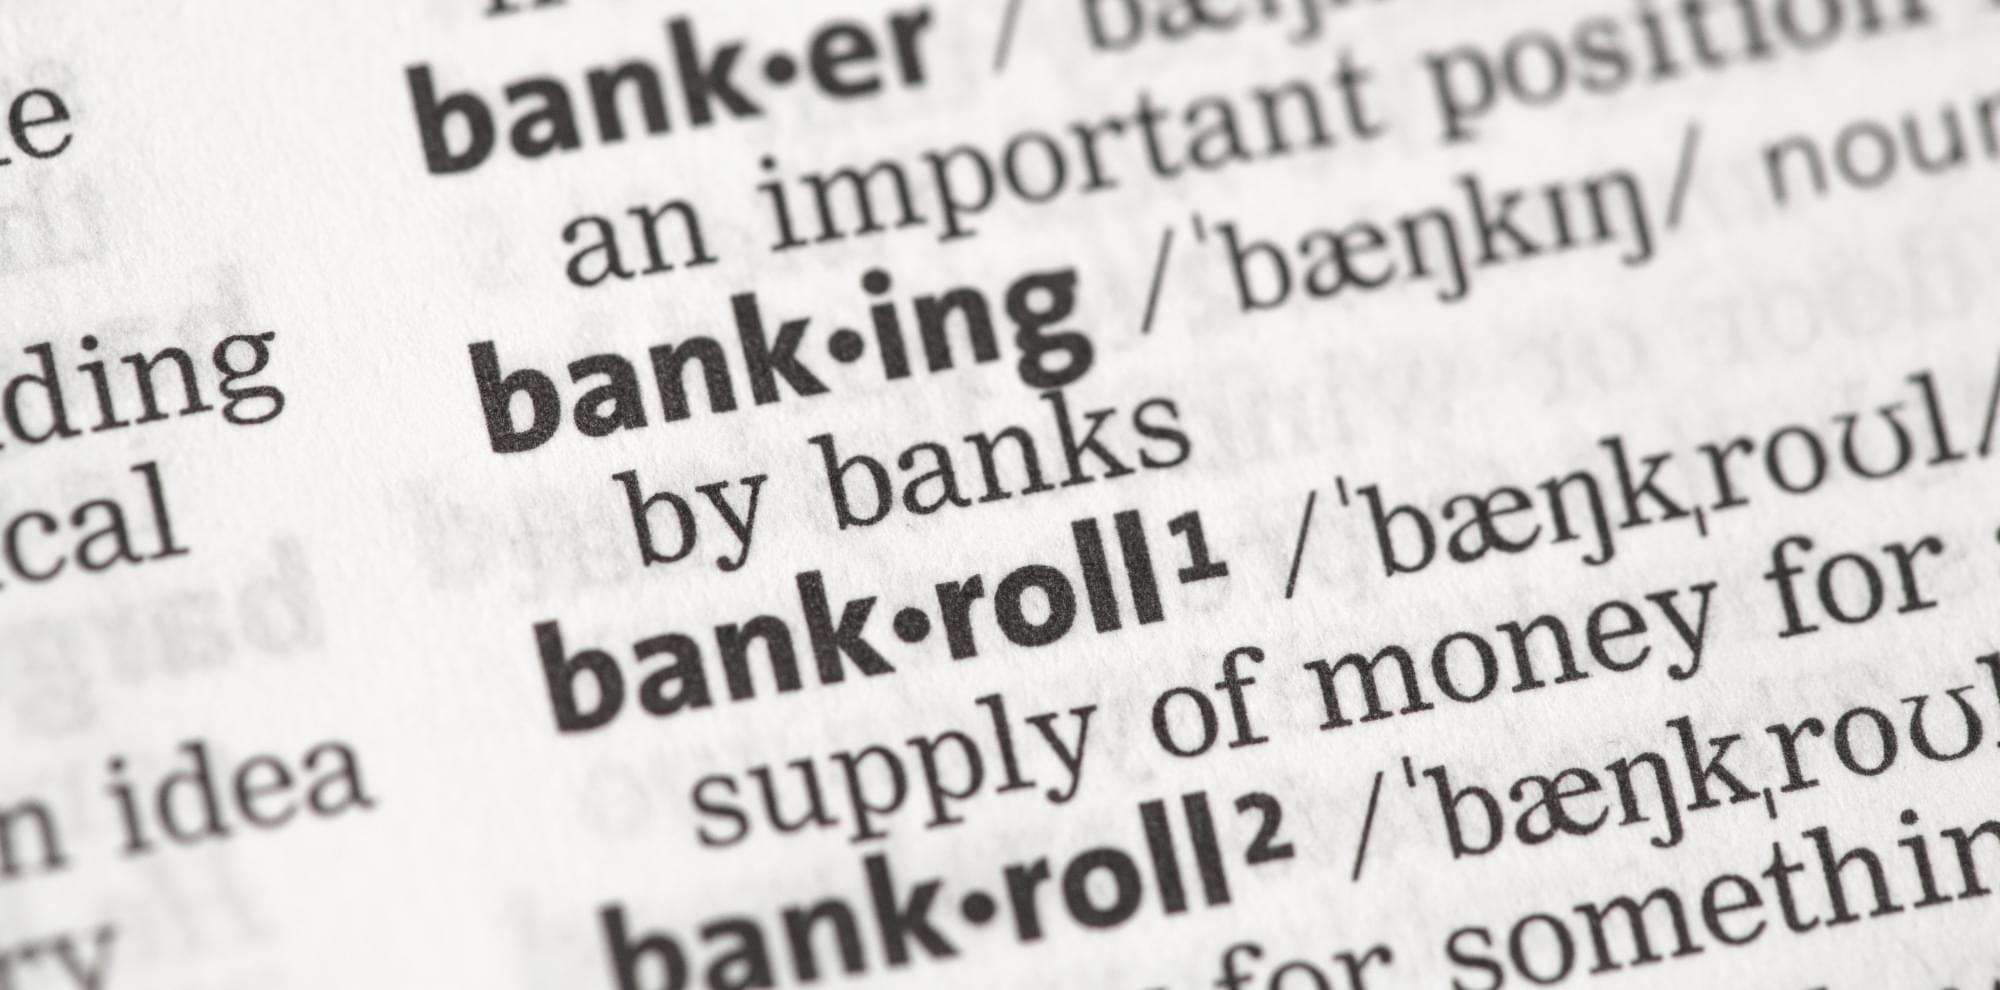 An image of banking definitions in the dictionary